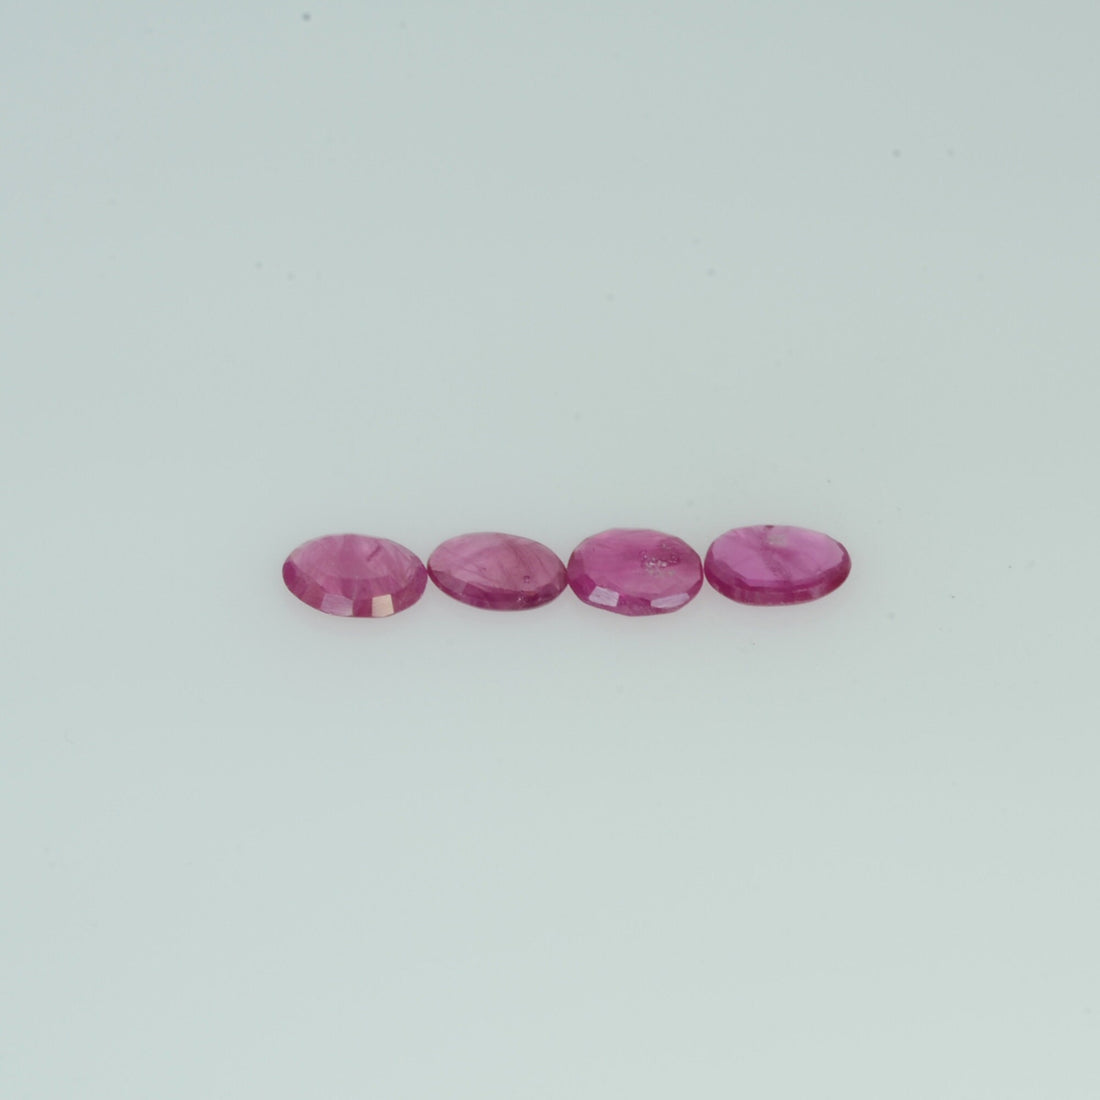 4x3 mm Lot Natural Ruby Loose Gemstone Oval Cut